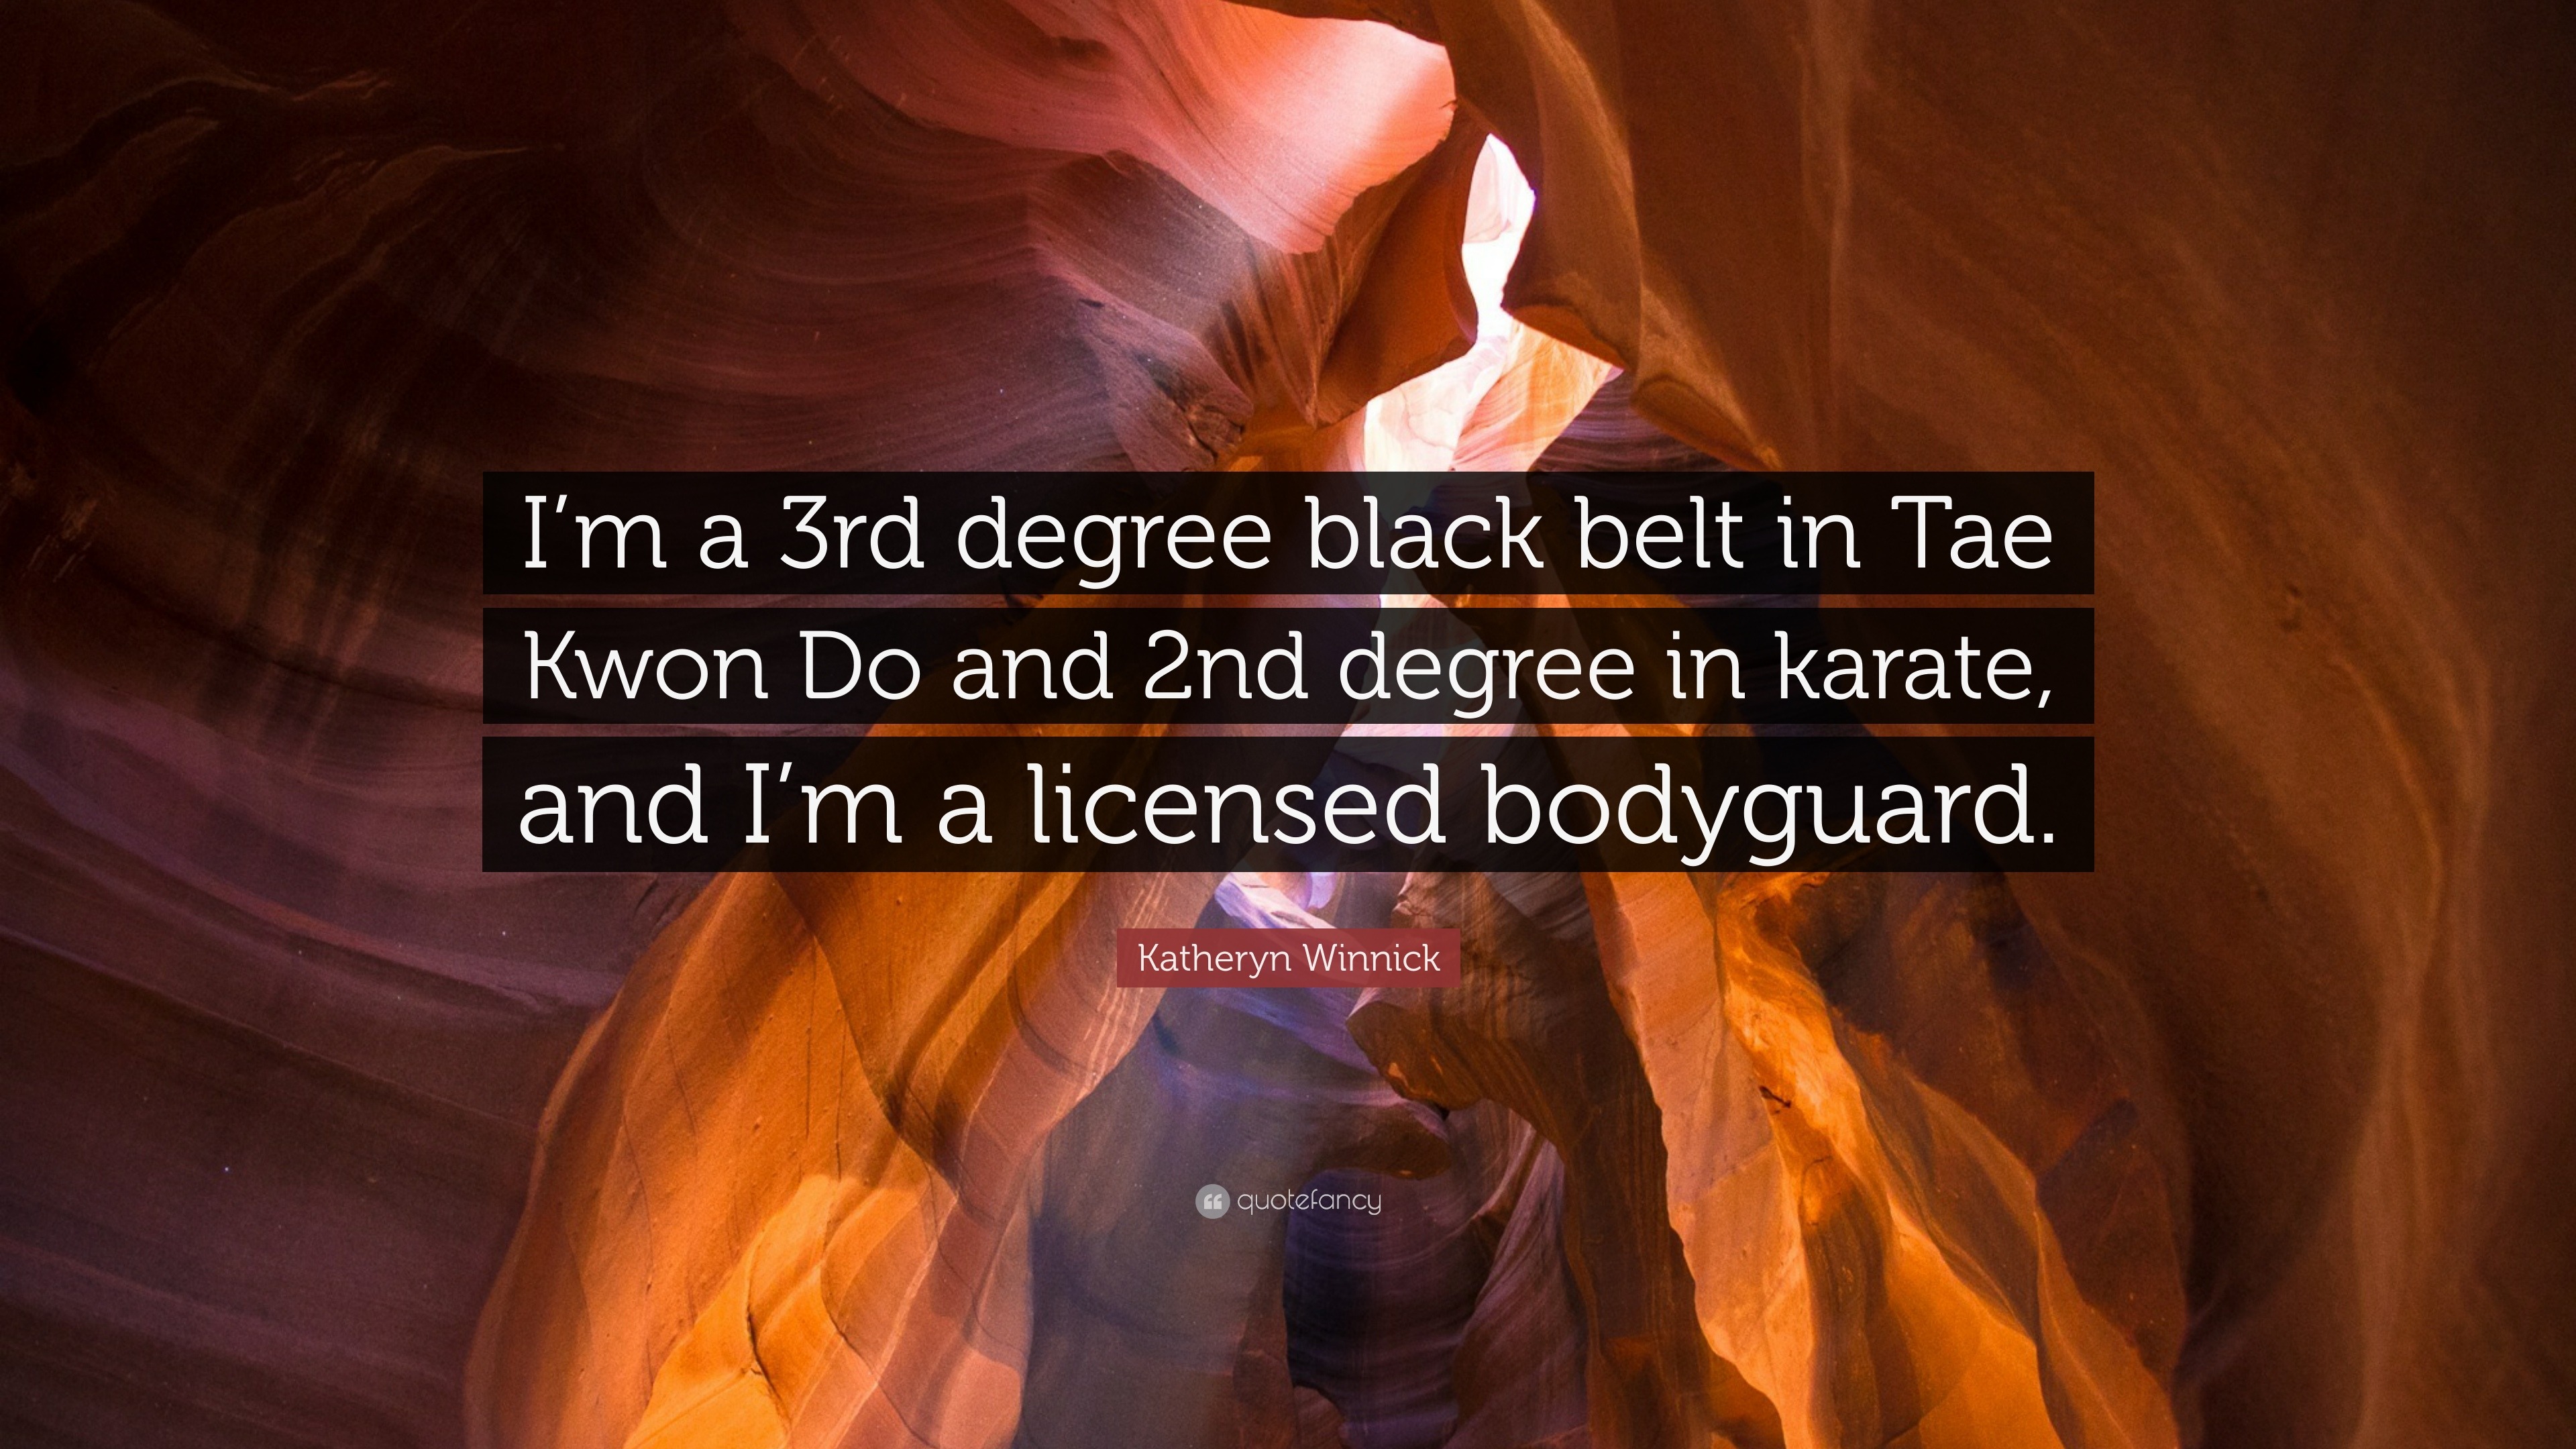 belt winnick katheryn kinison karate sam degree quote tae kwon able quotes 3rd death 2nd wallpapers tough least well quotefancy